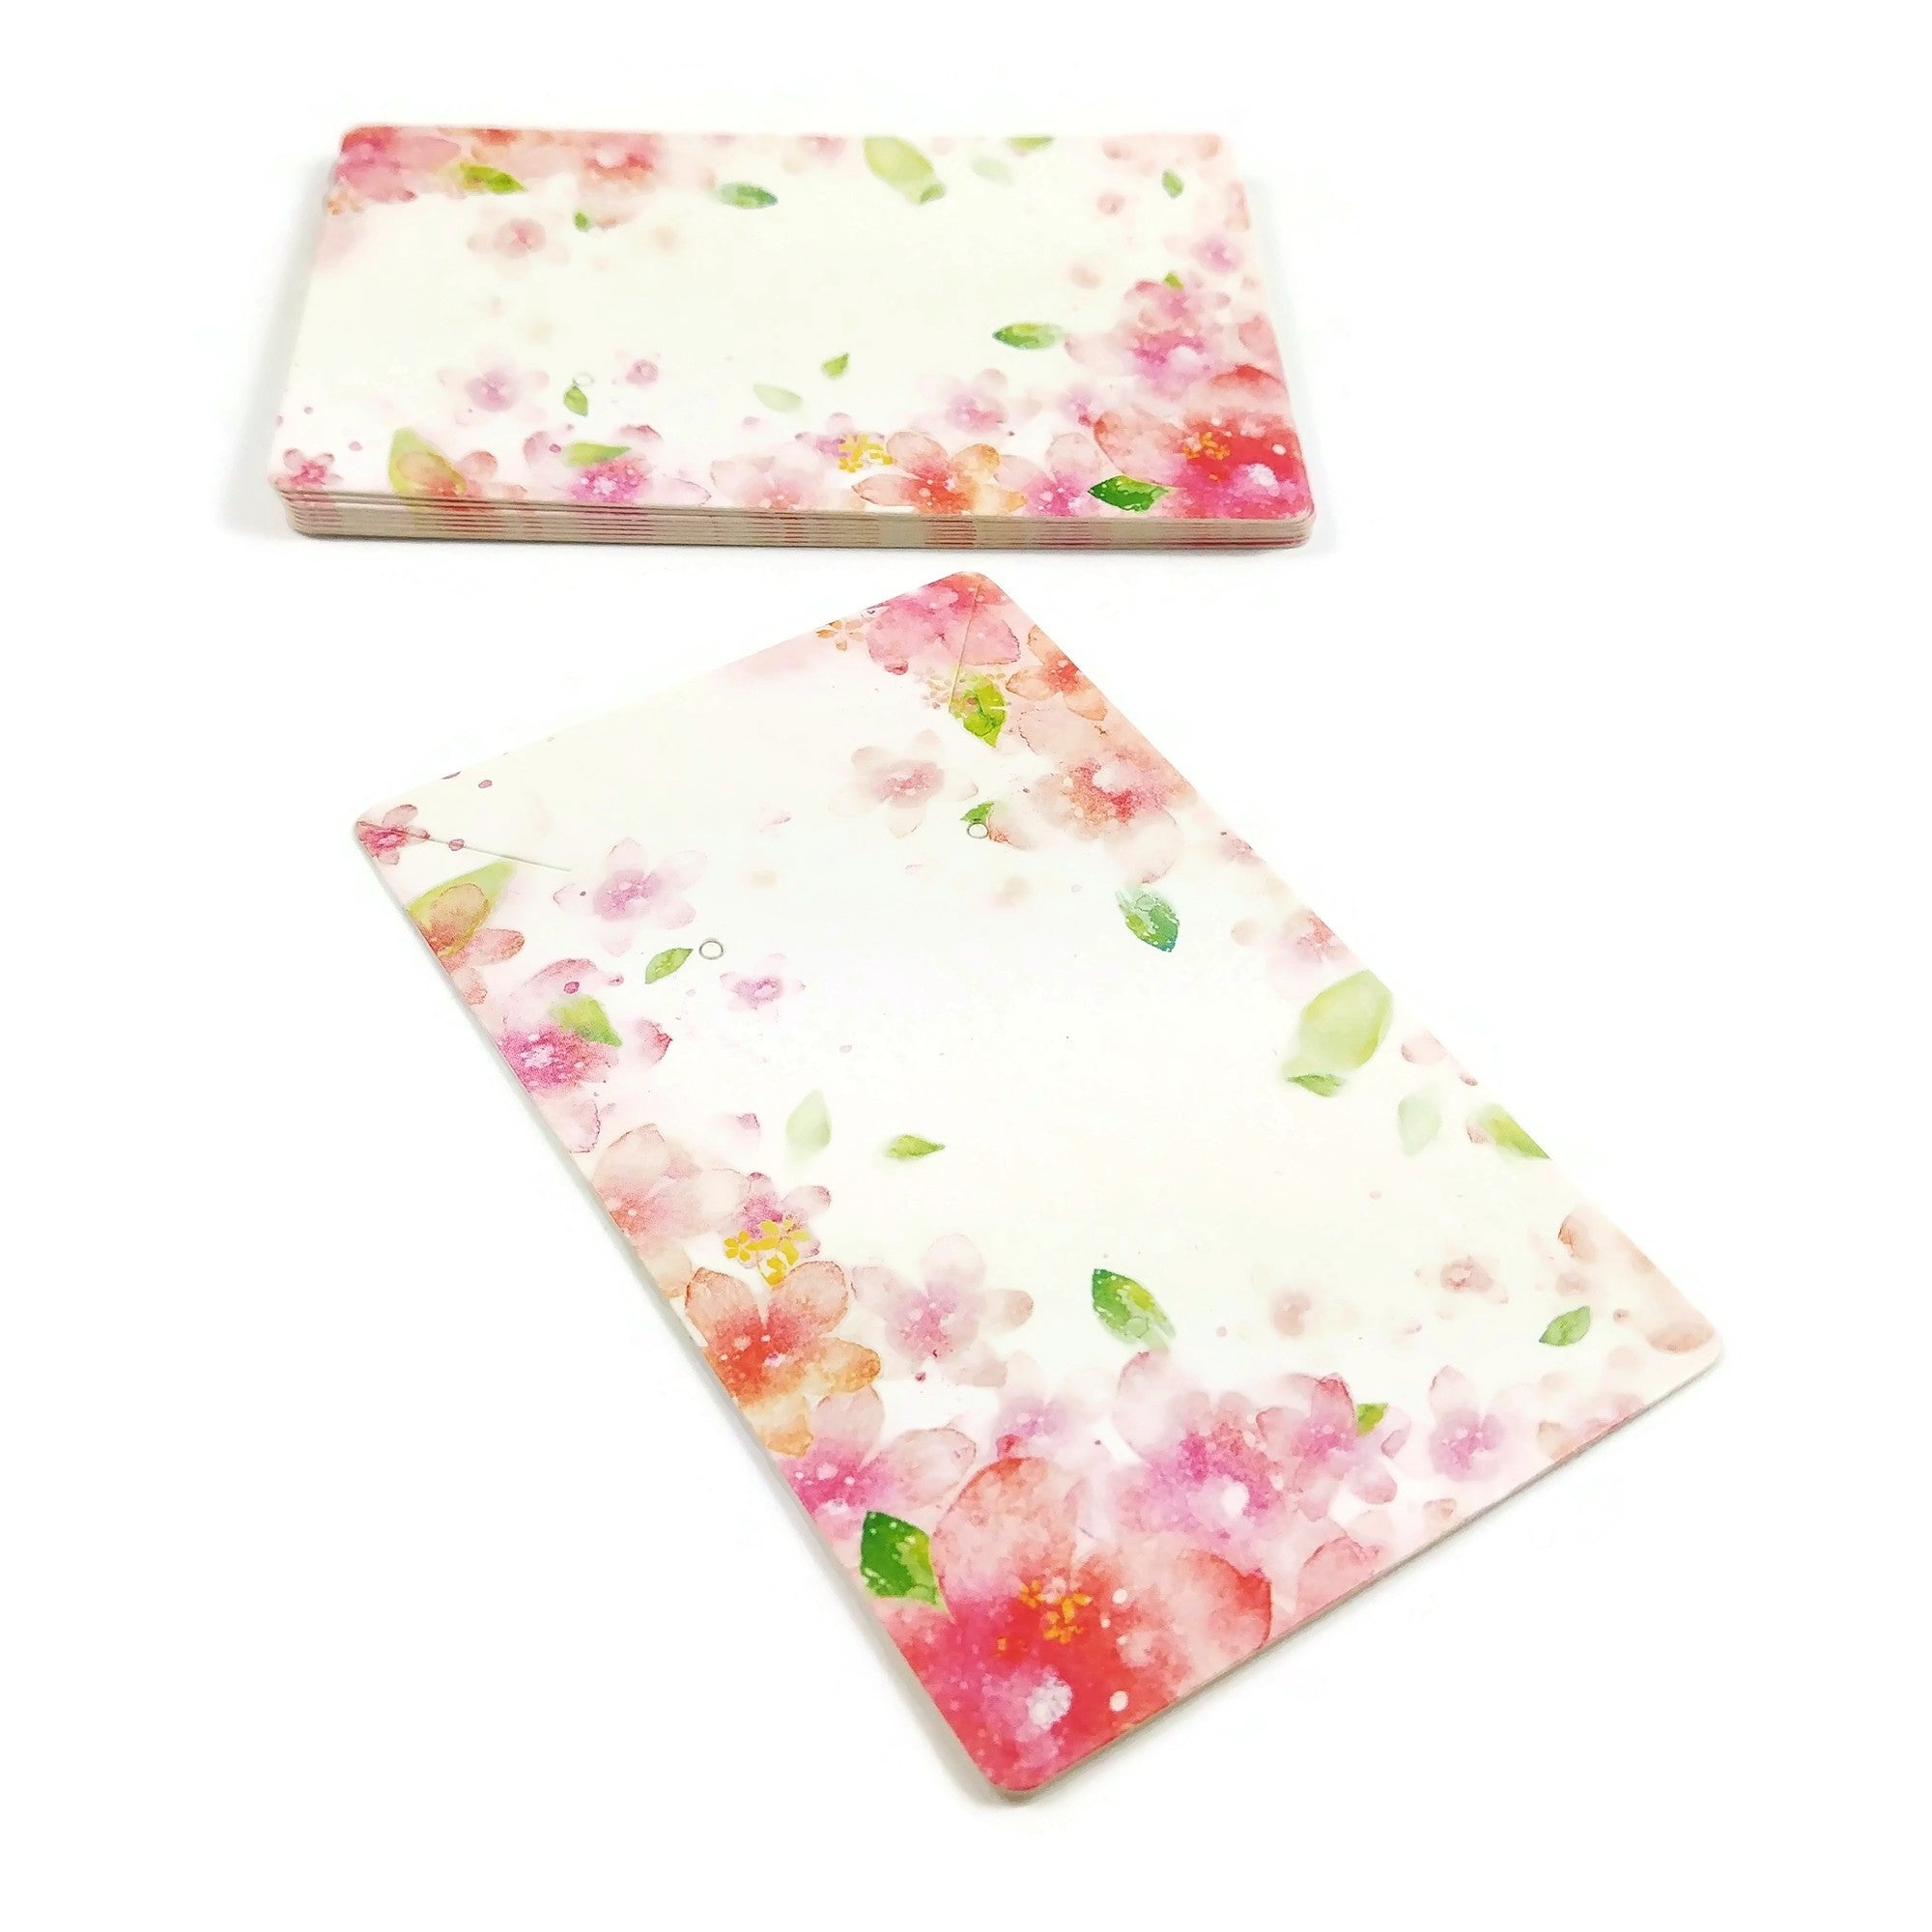 Paper Ear Studs Hang Tag Jewelry Display Card Earring - pink flower pattern